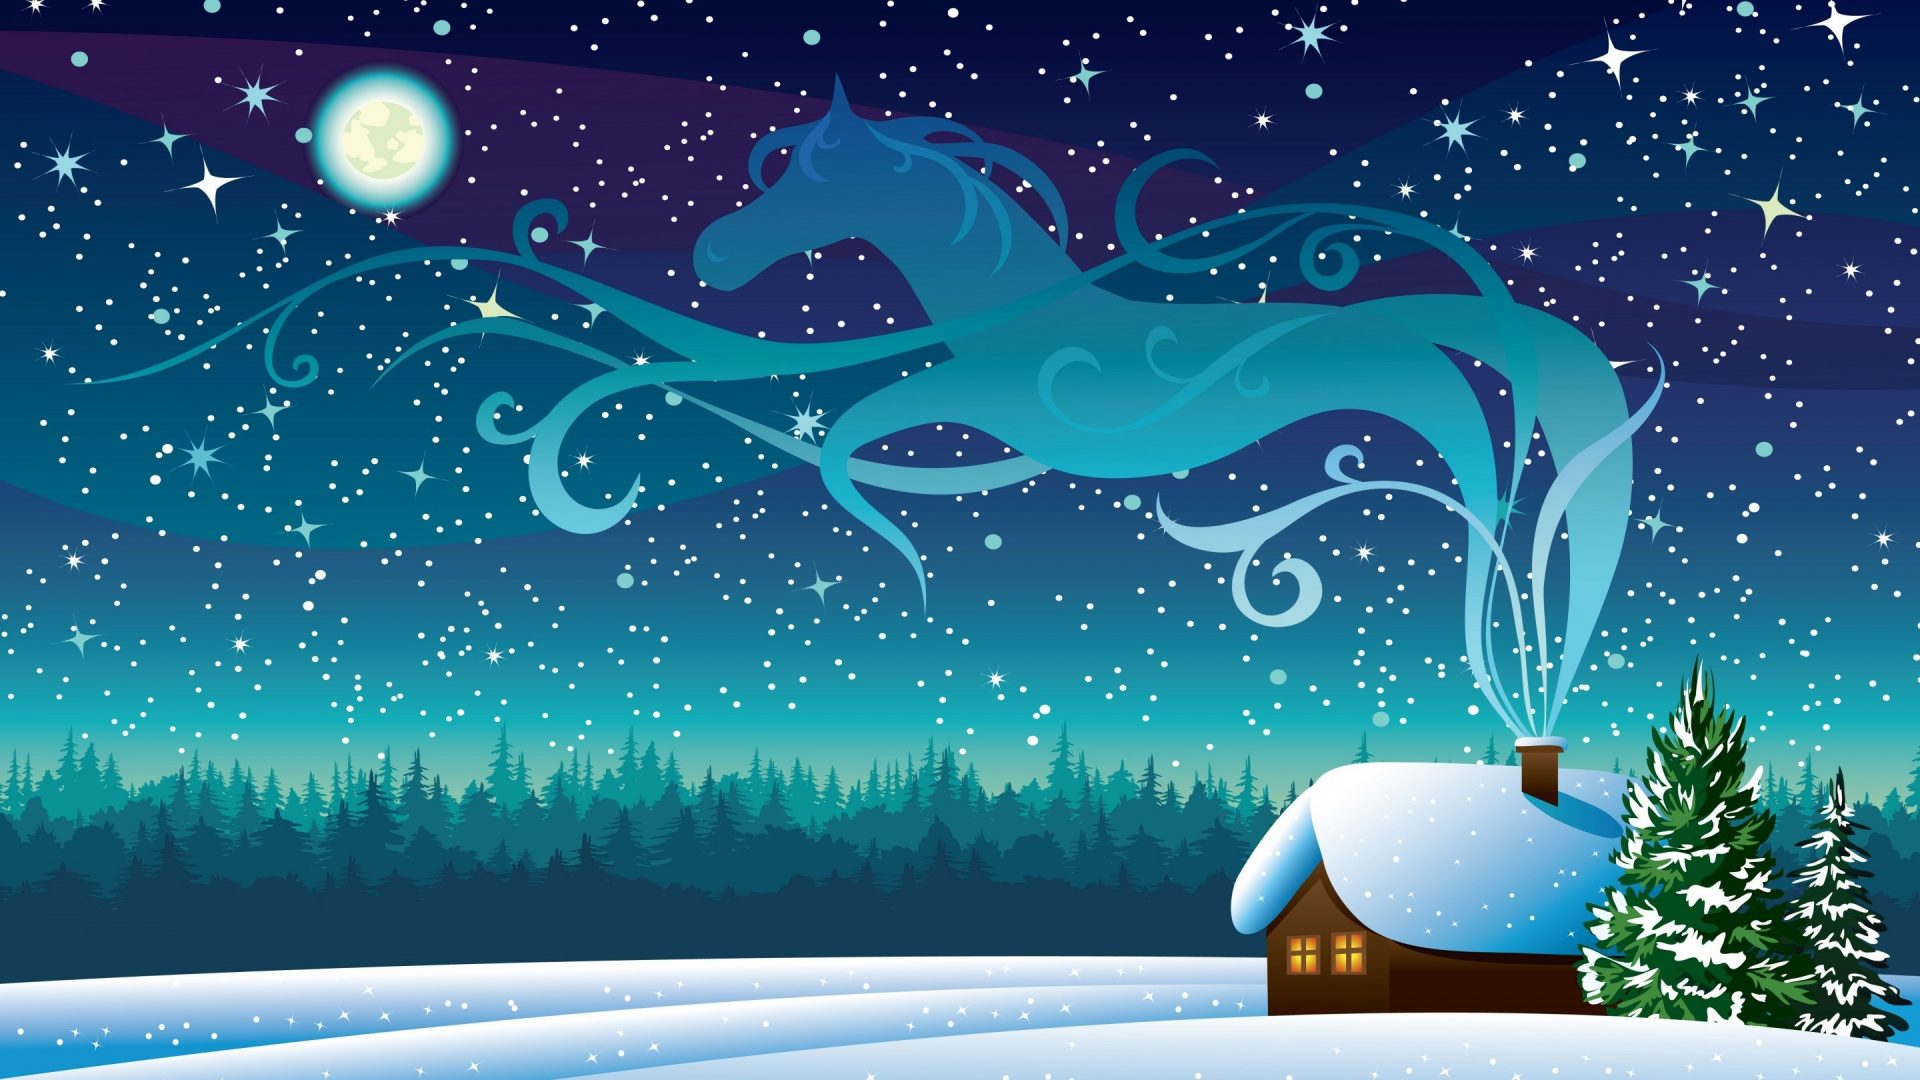 Winter Night Starry Sky Full Moon Wooden House Drawing For Christmas Uhd Wallpaper 2880x1800, Wallpaper13.com